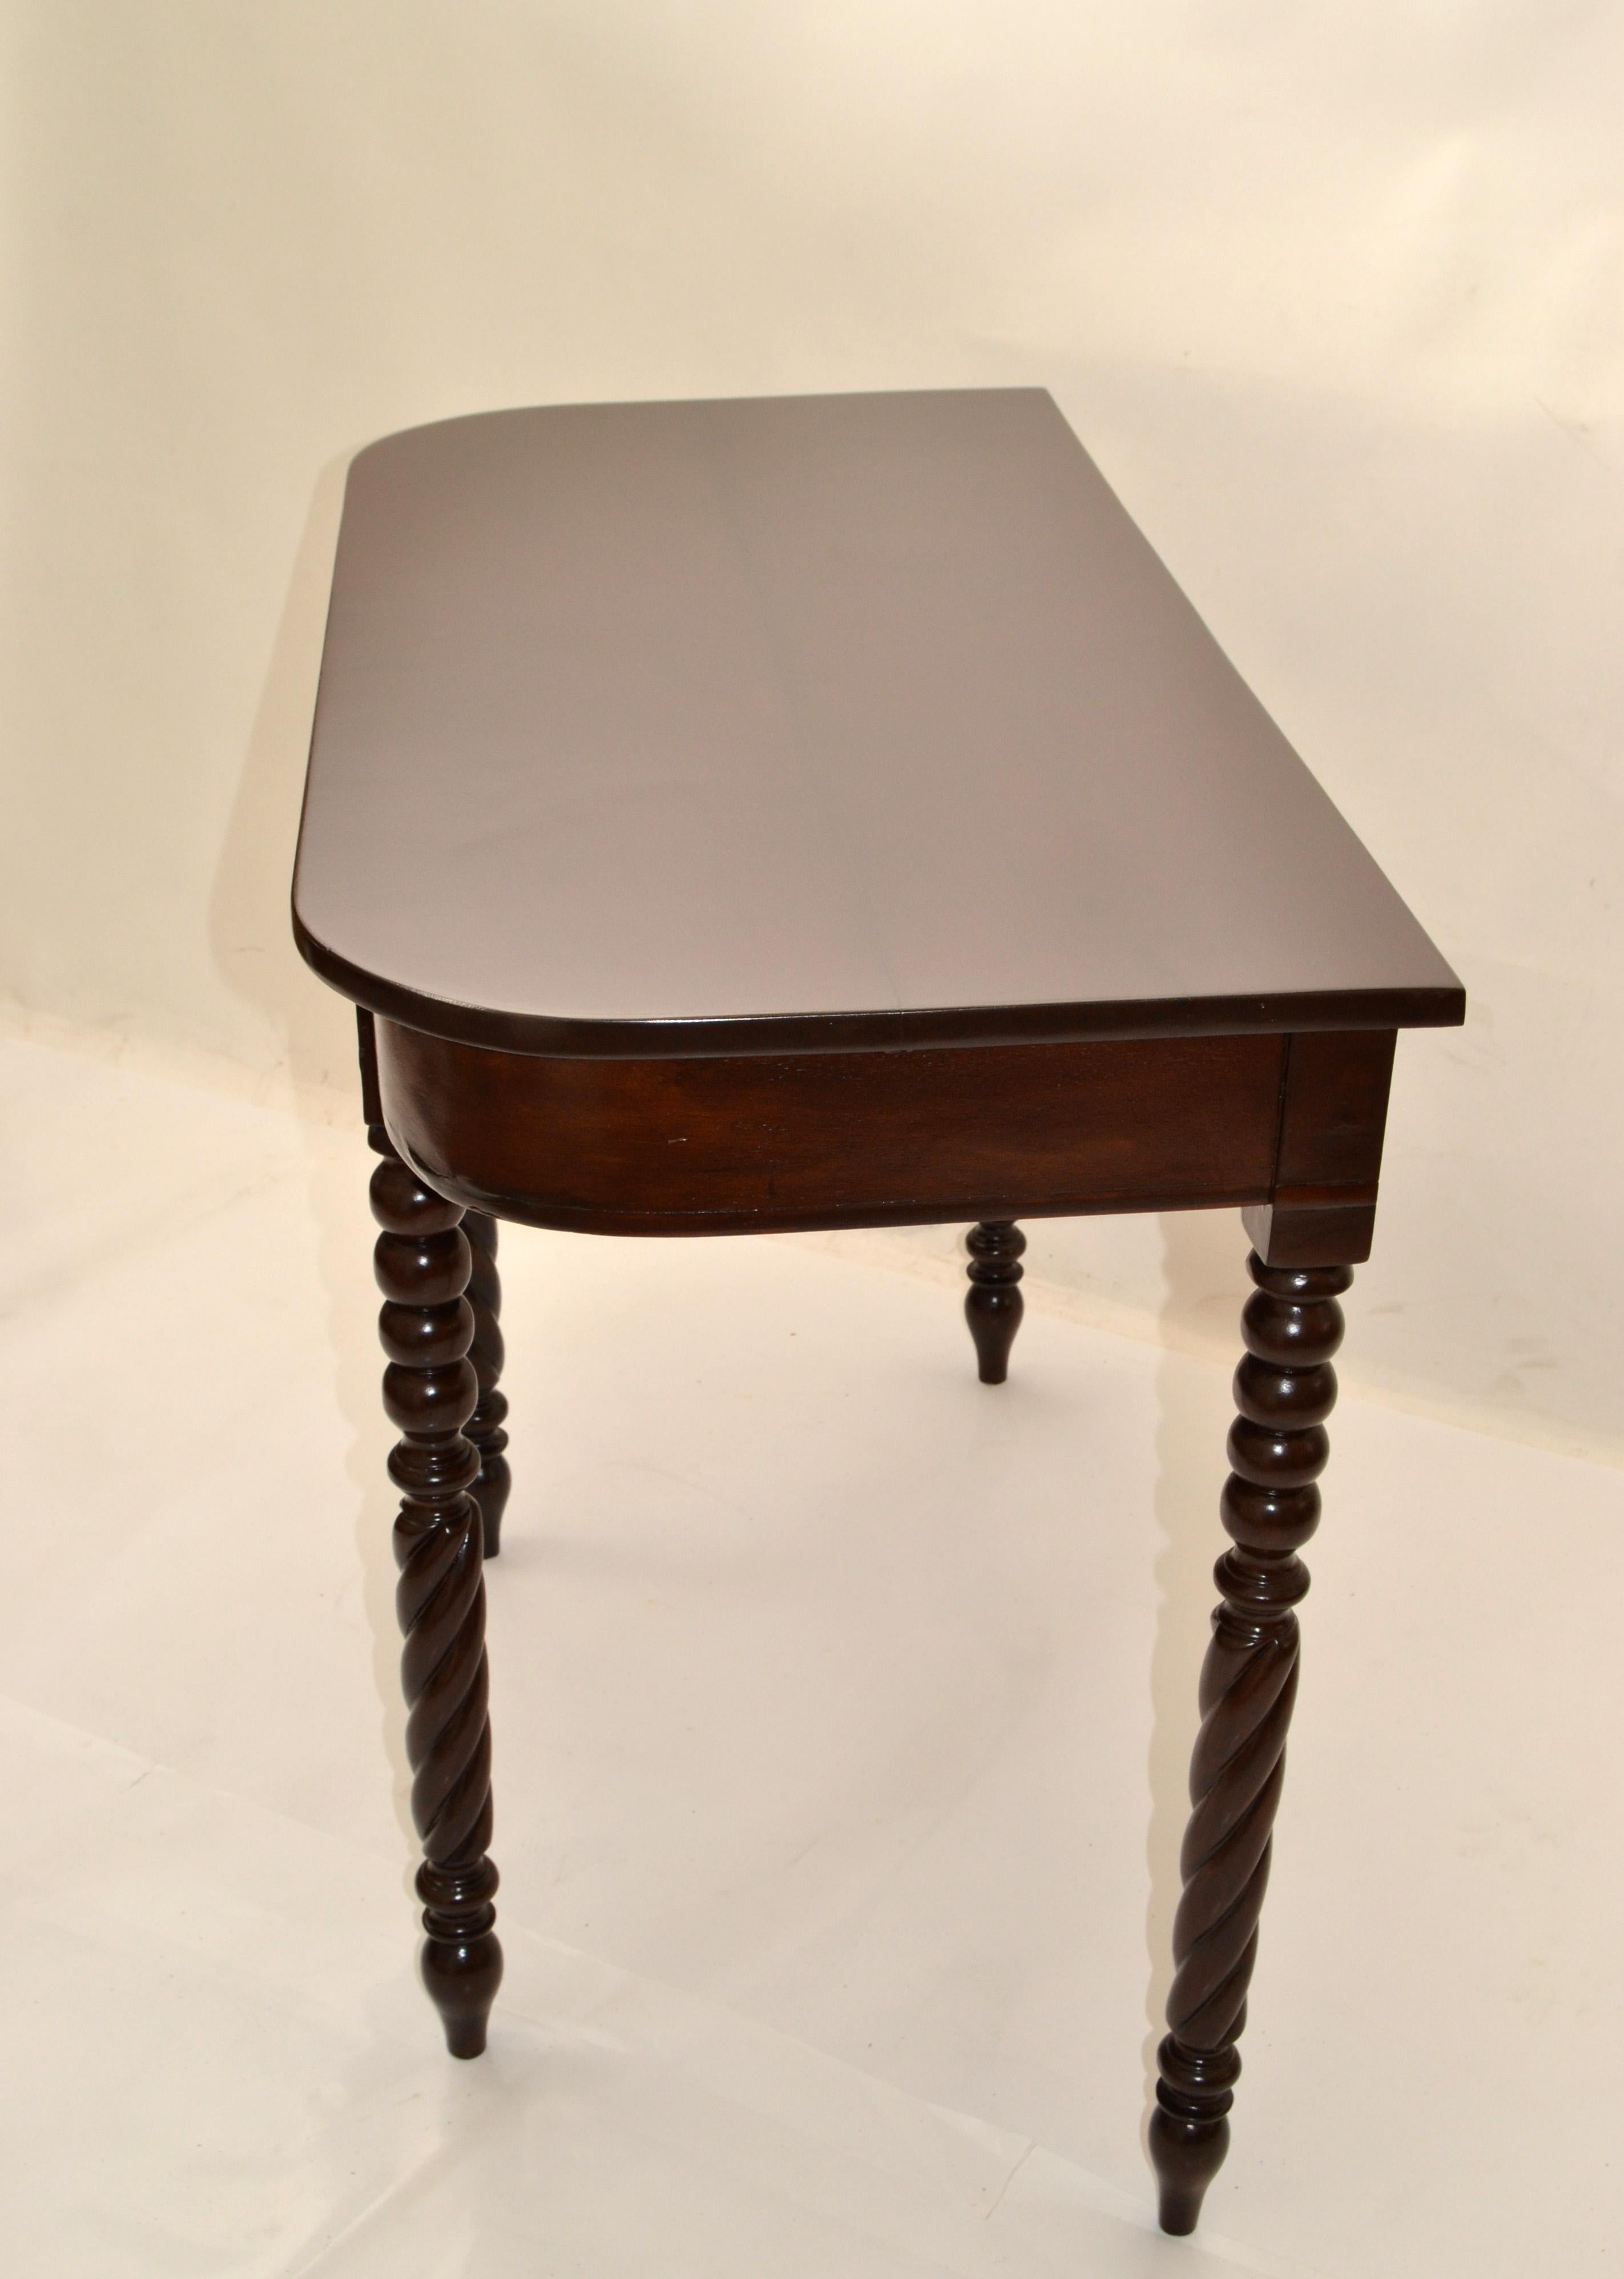 19th Century Brown Finish Console or Hallway Table Vanity Turned Tapered Legs In Good Condition For Sale In Miami, FL